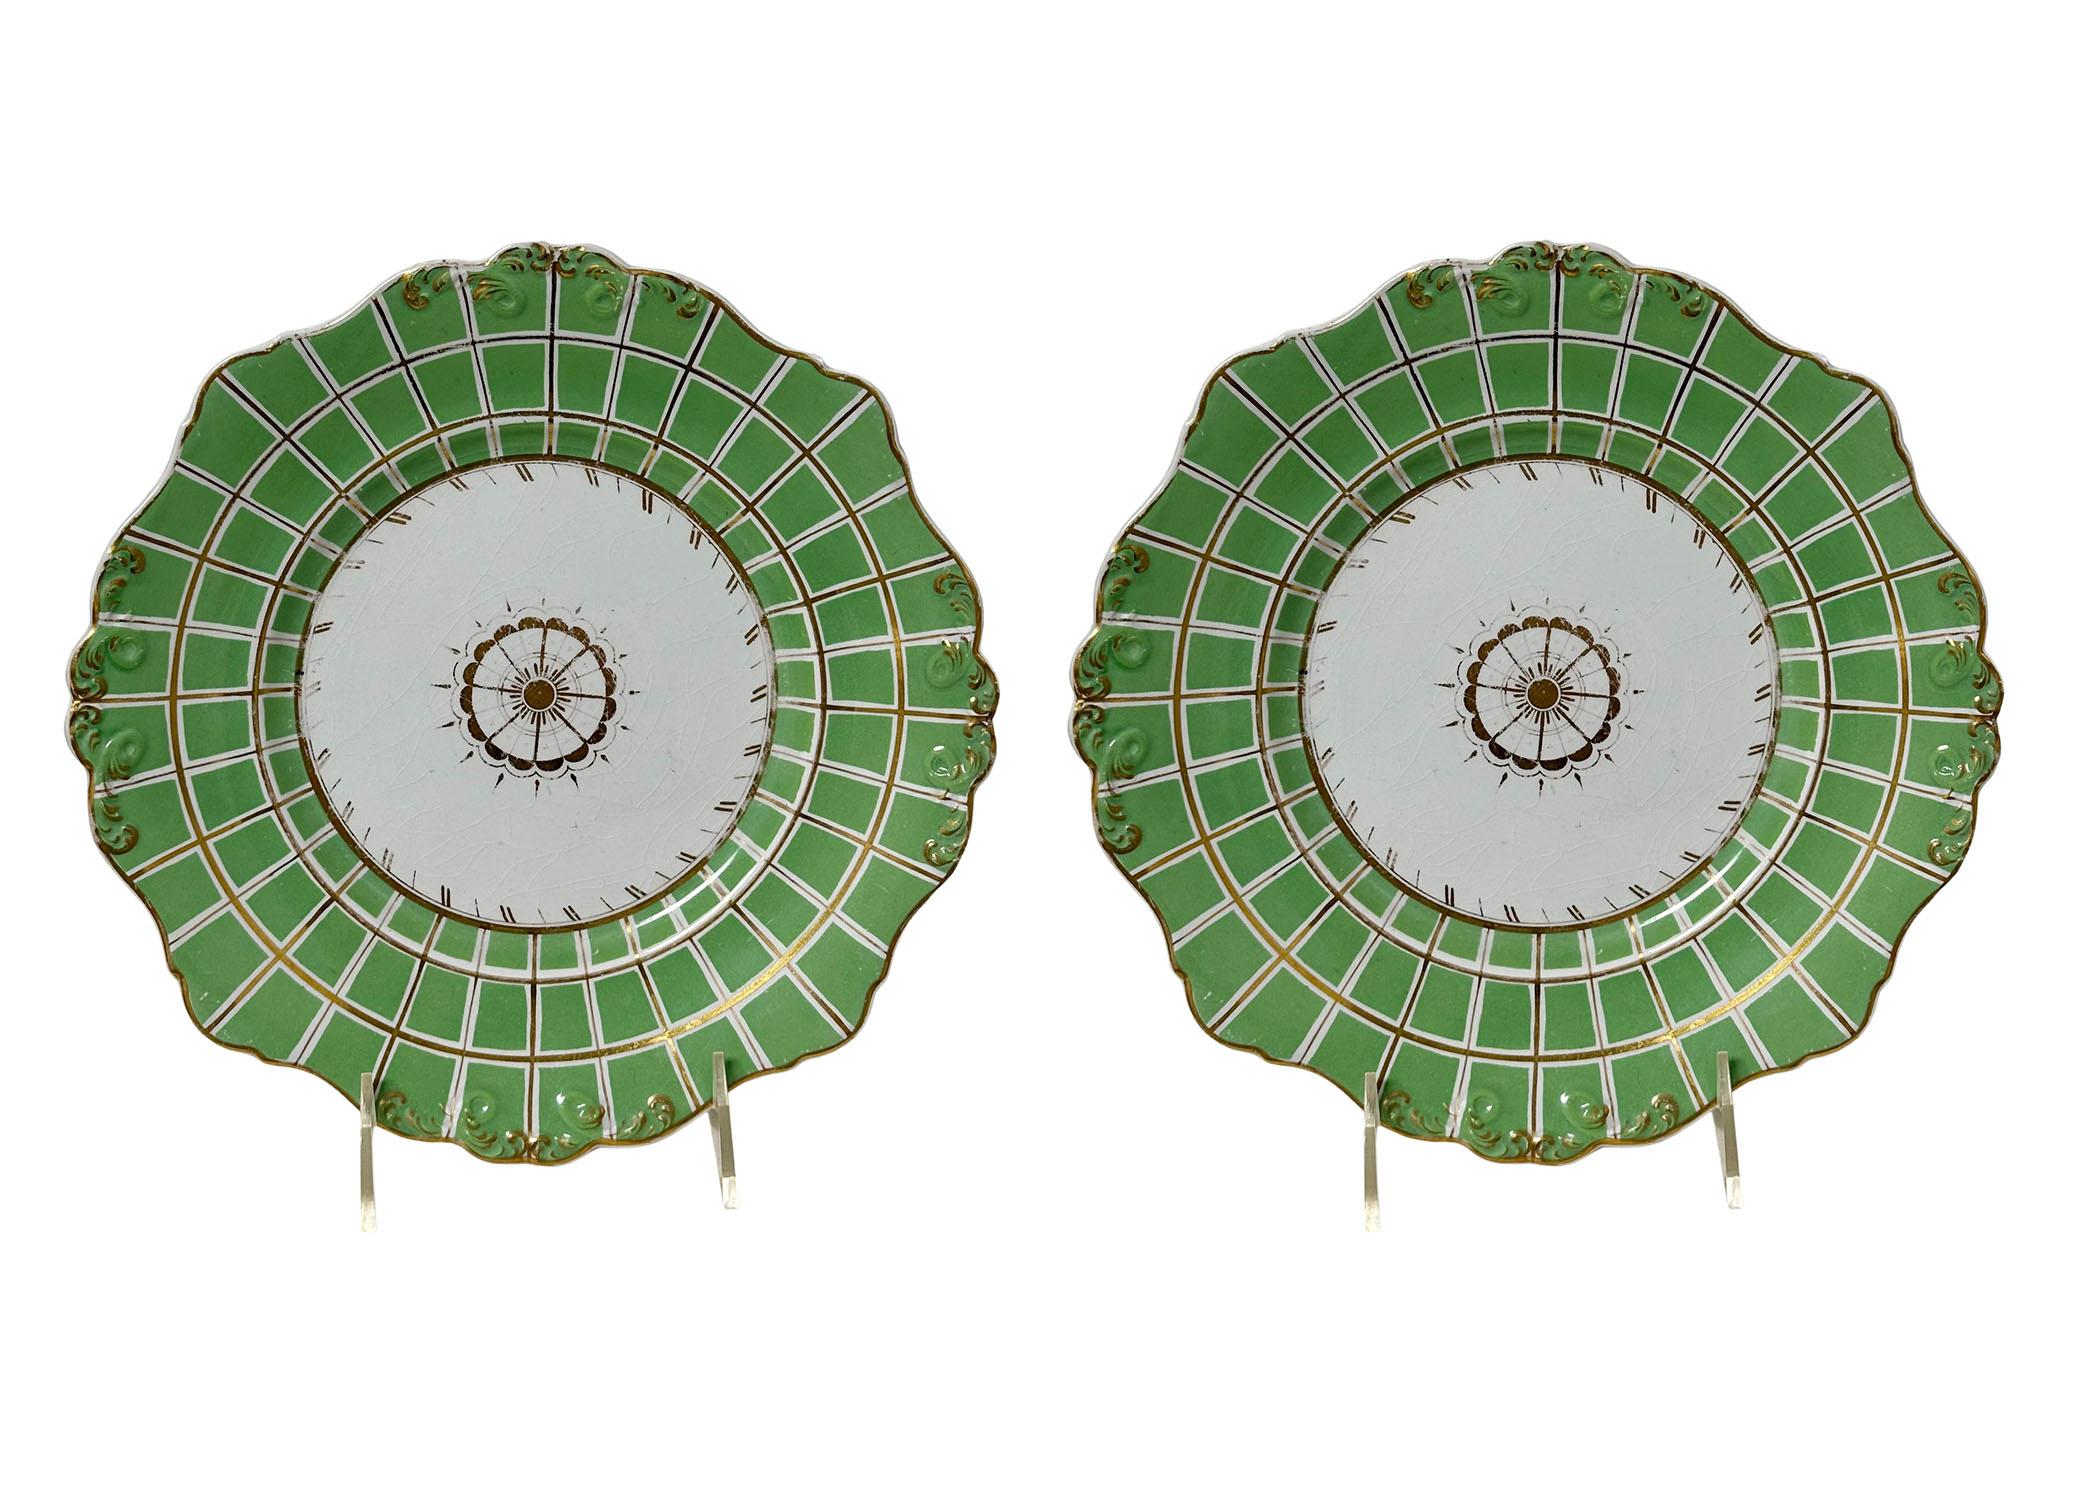 A pair of 19th century plates from England. They are marked pearl on the back. The color is fantastic probably from a dessert set.